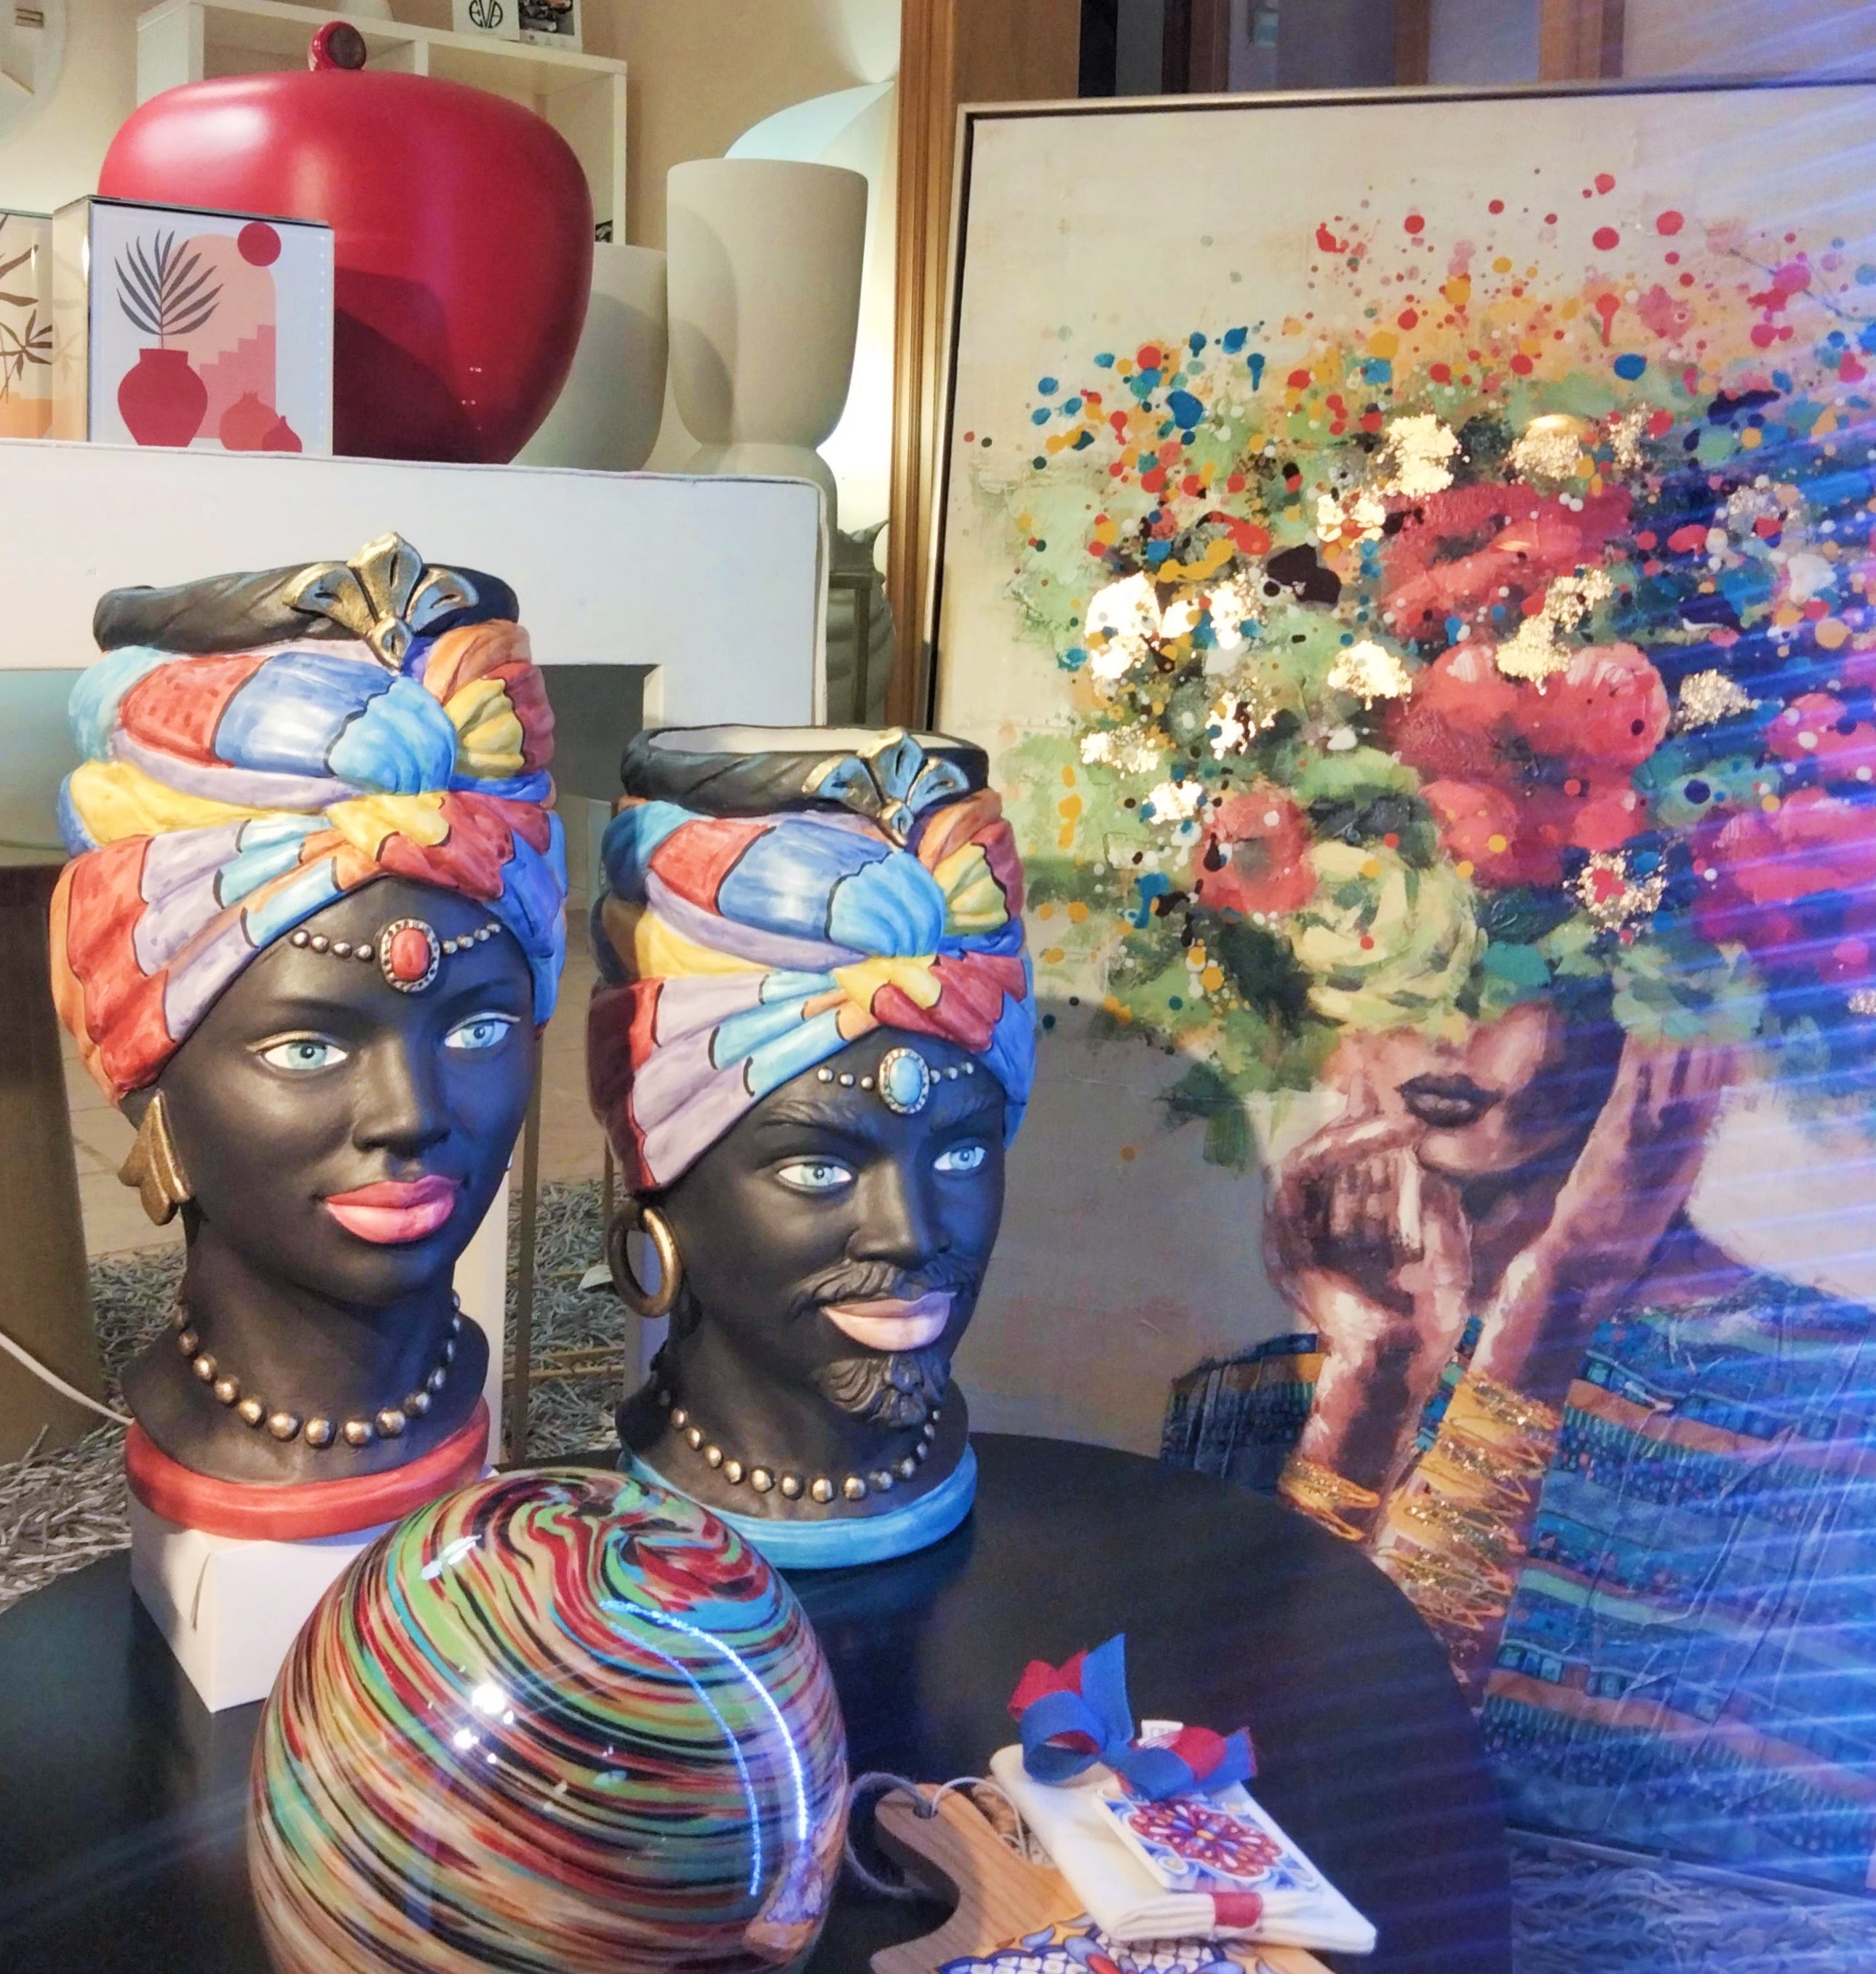 Satin Moor heads with multicolored turban